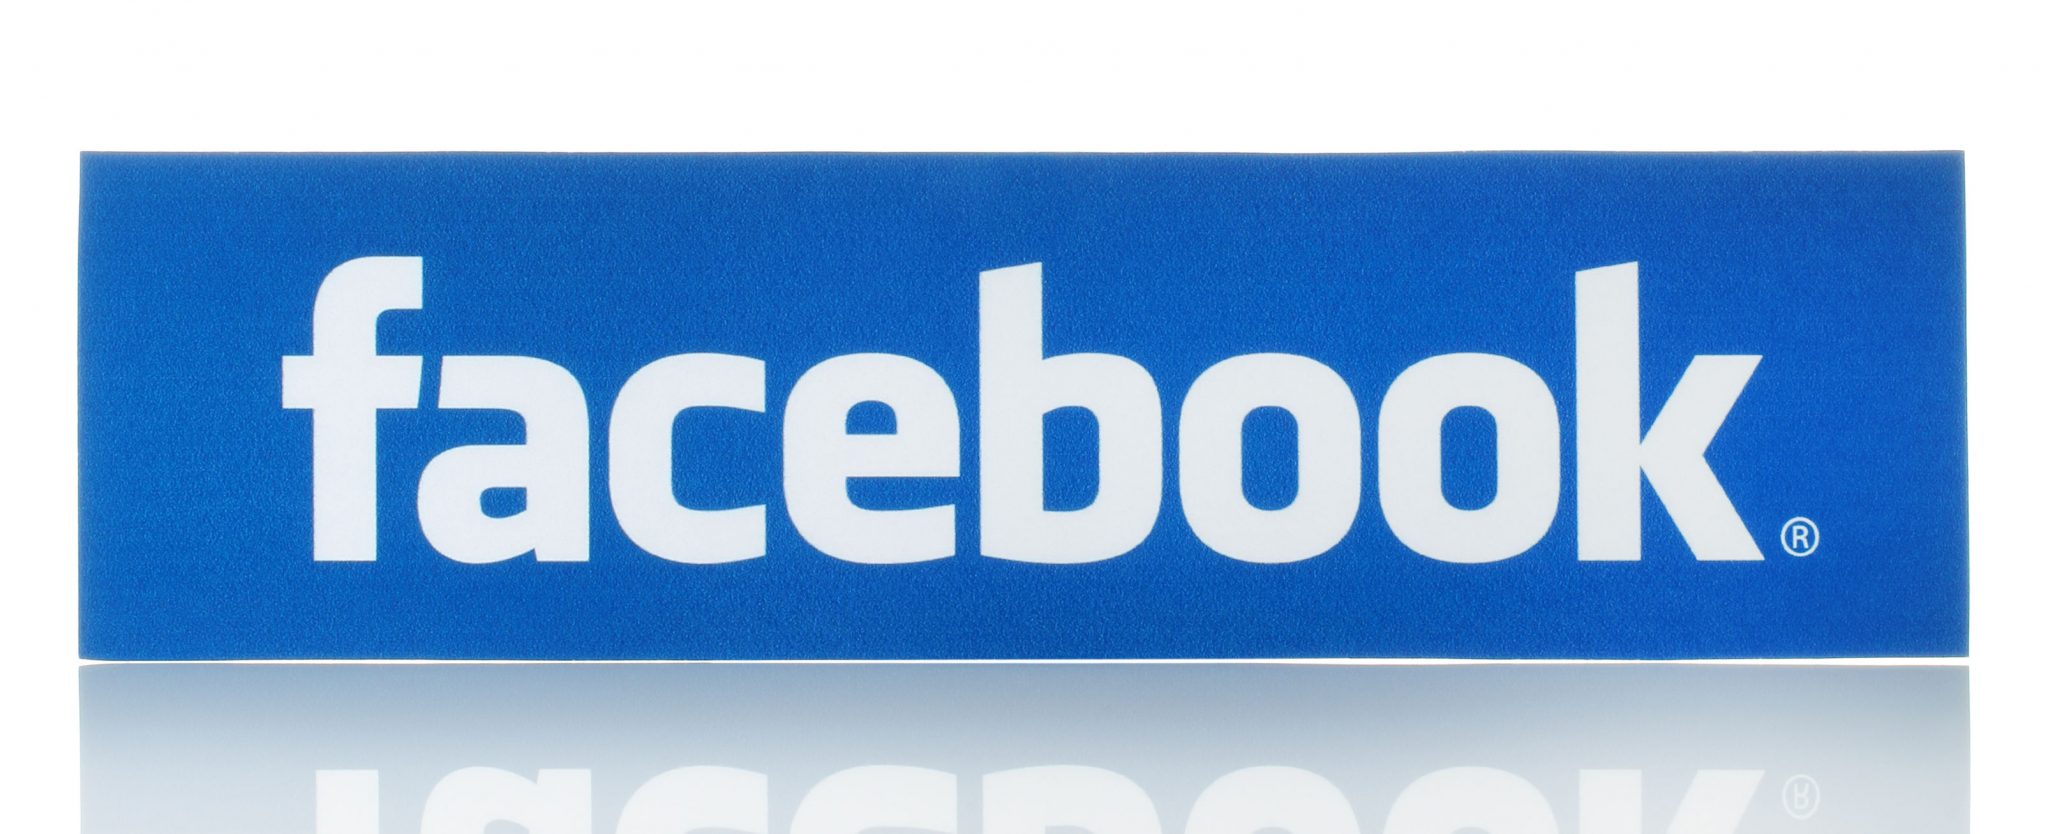 37759329 - kiev, ukraine - february 19, 2015:facebook logo sign printed on paper and placed on white background. facebook is a well-known social networking service.